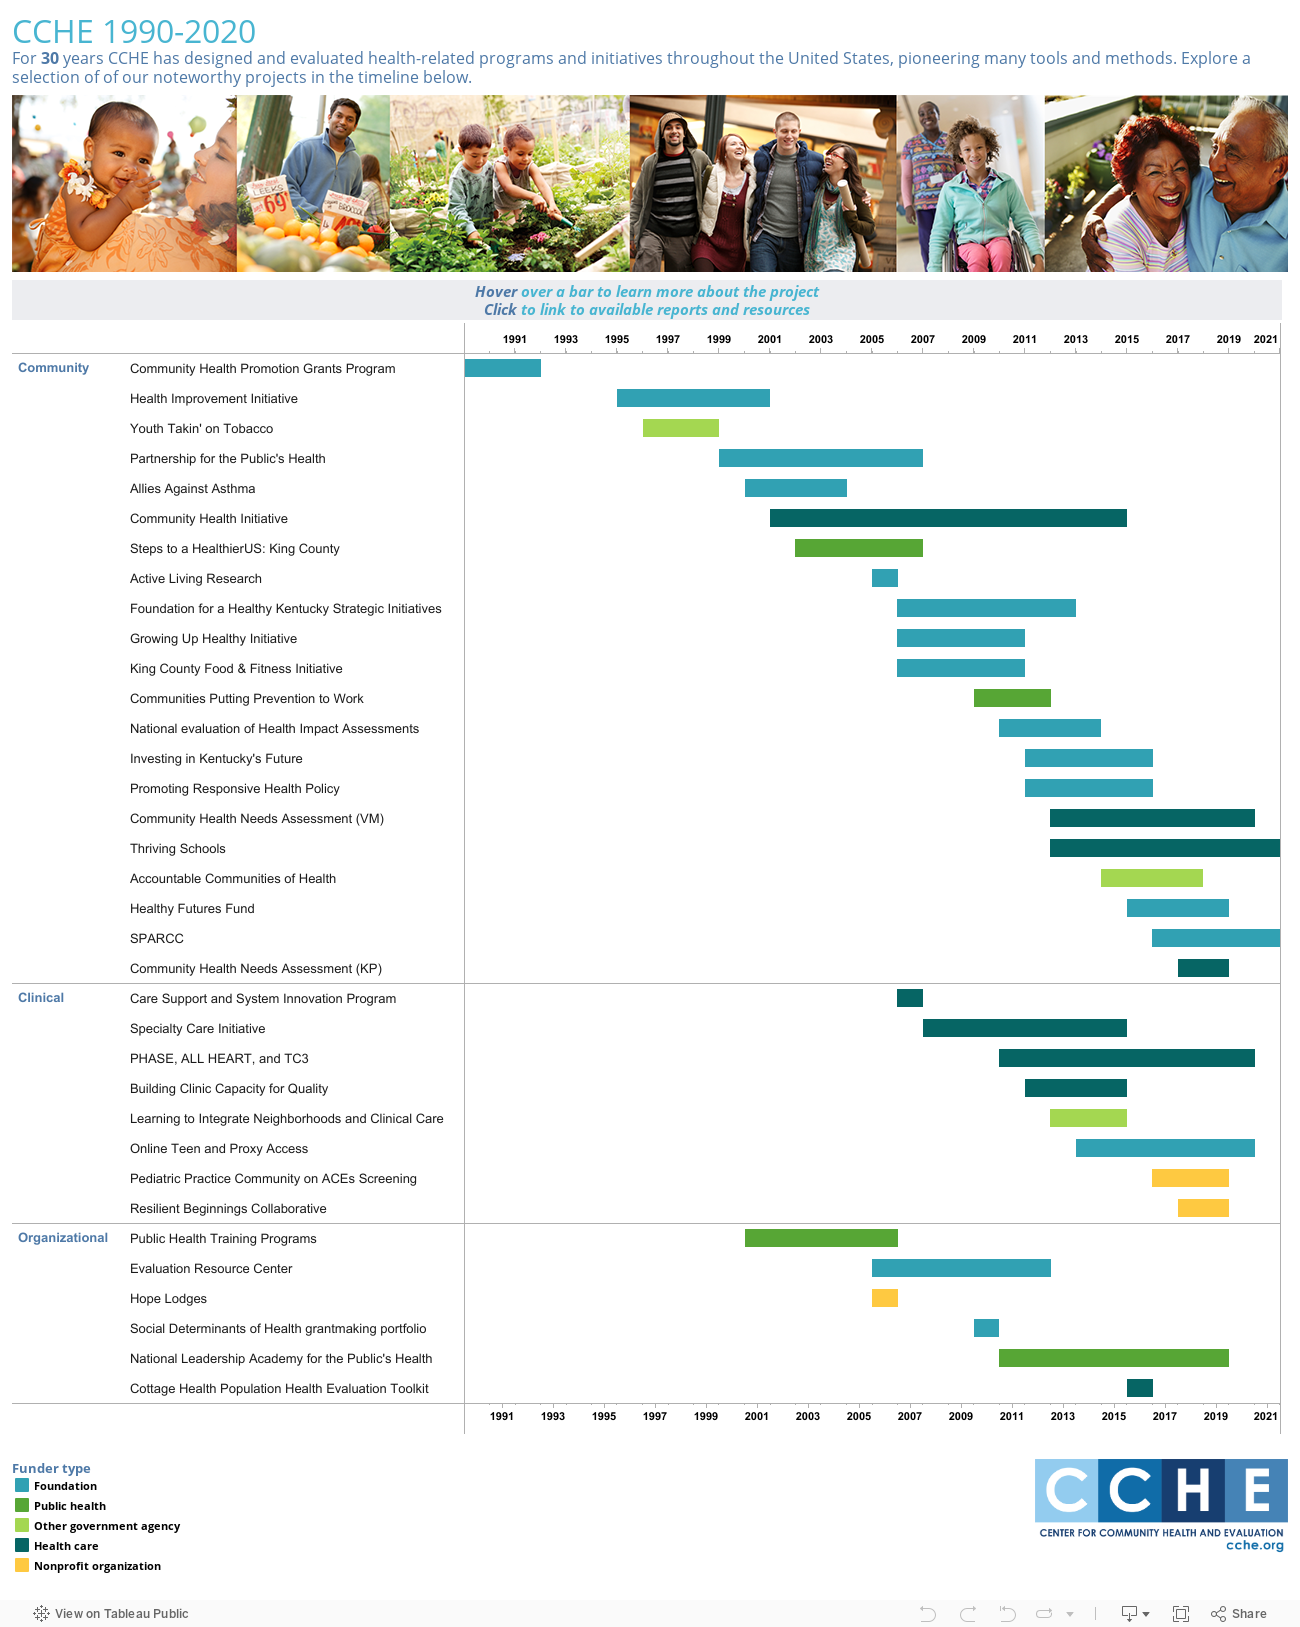 CCHE 1990-2020For 30 years CCHE has designed and evaluated health-related programs and initiatives throughout the United States, pioneering many tools and methods. Explore a selection of of our noteworthy projects in the timeline below. 